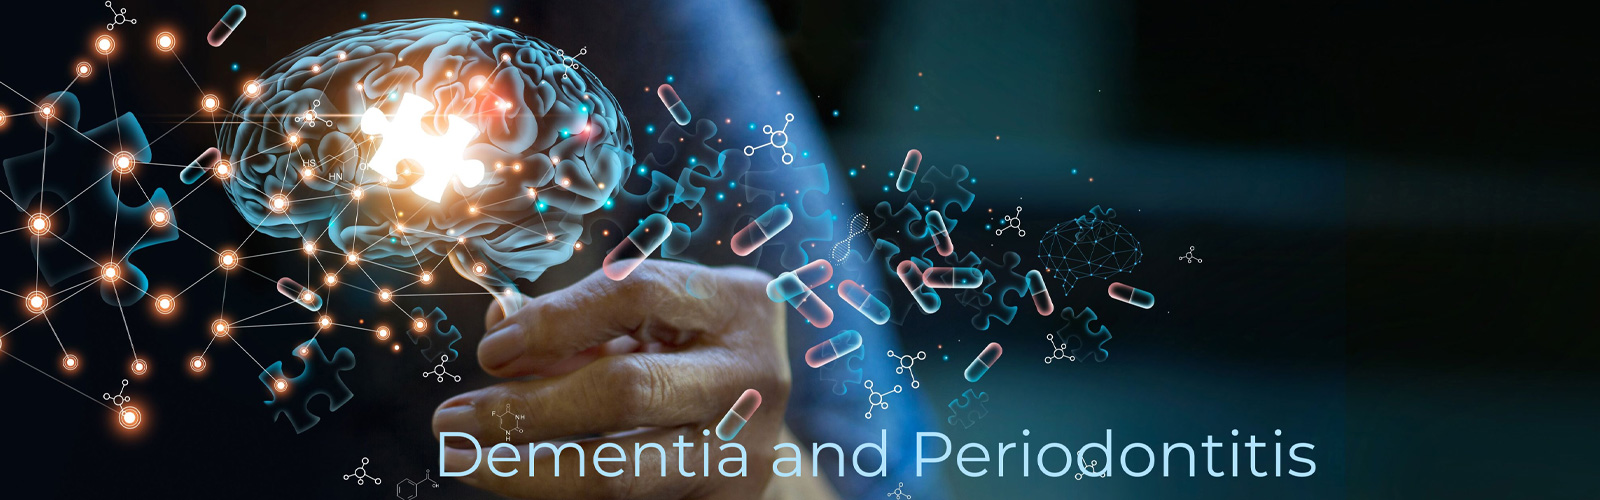 Cognitive Decline or Periodontists – Which Comes First?